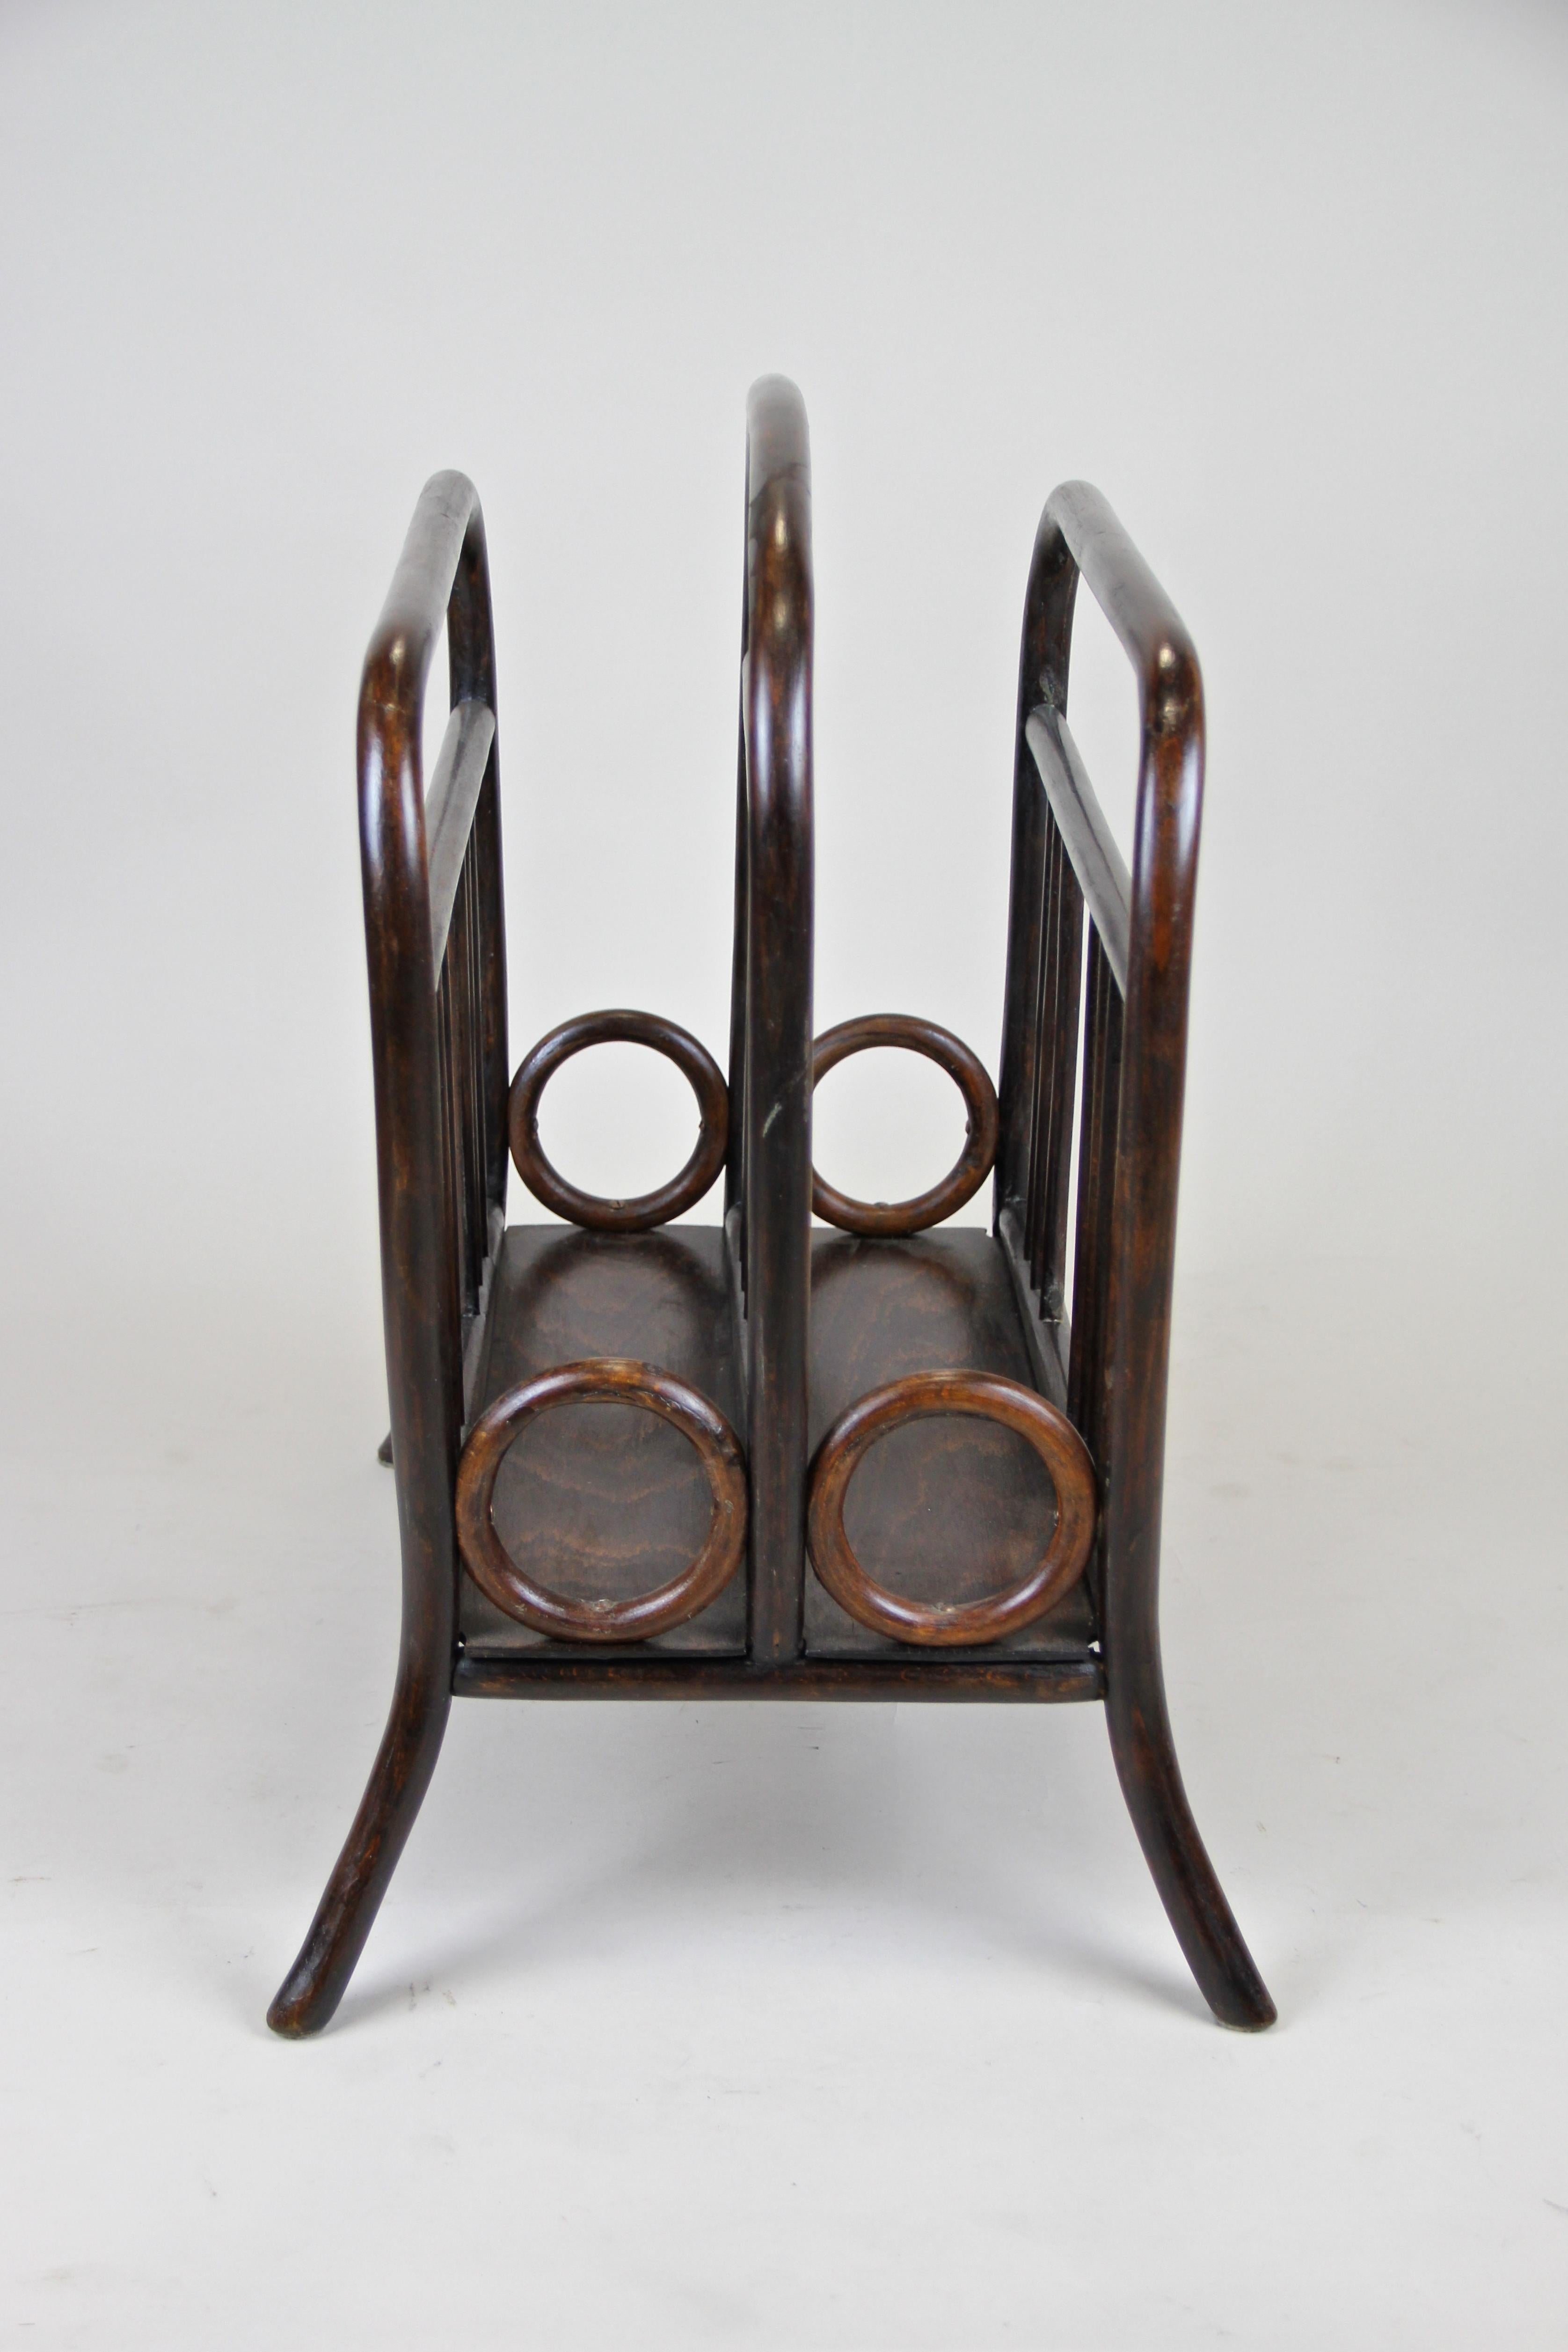 Elegant Thonet Newspaper Rack, catalogue No. 33, from Austria circa 1905. Made of Fine bentwood and trimmed to a beautiful nut wood look, this rack comes with two compartments for your magazines and could be also used for storing vinyls. Marked with